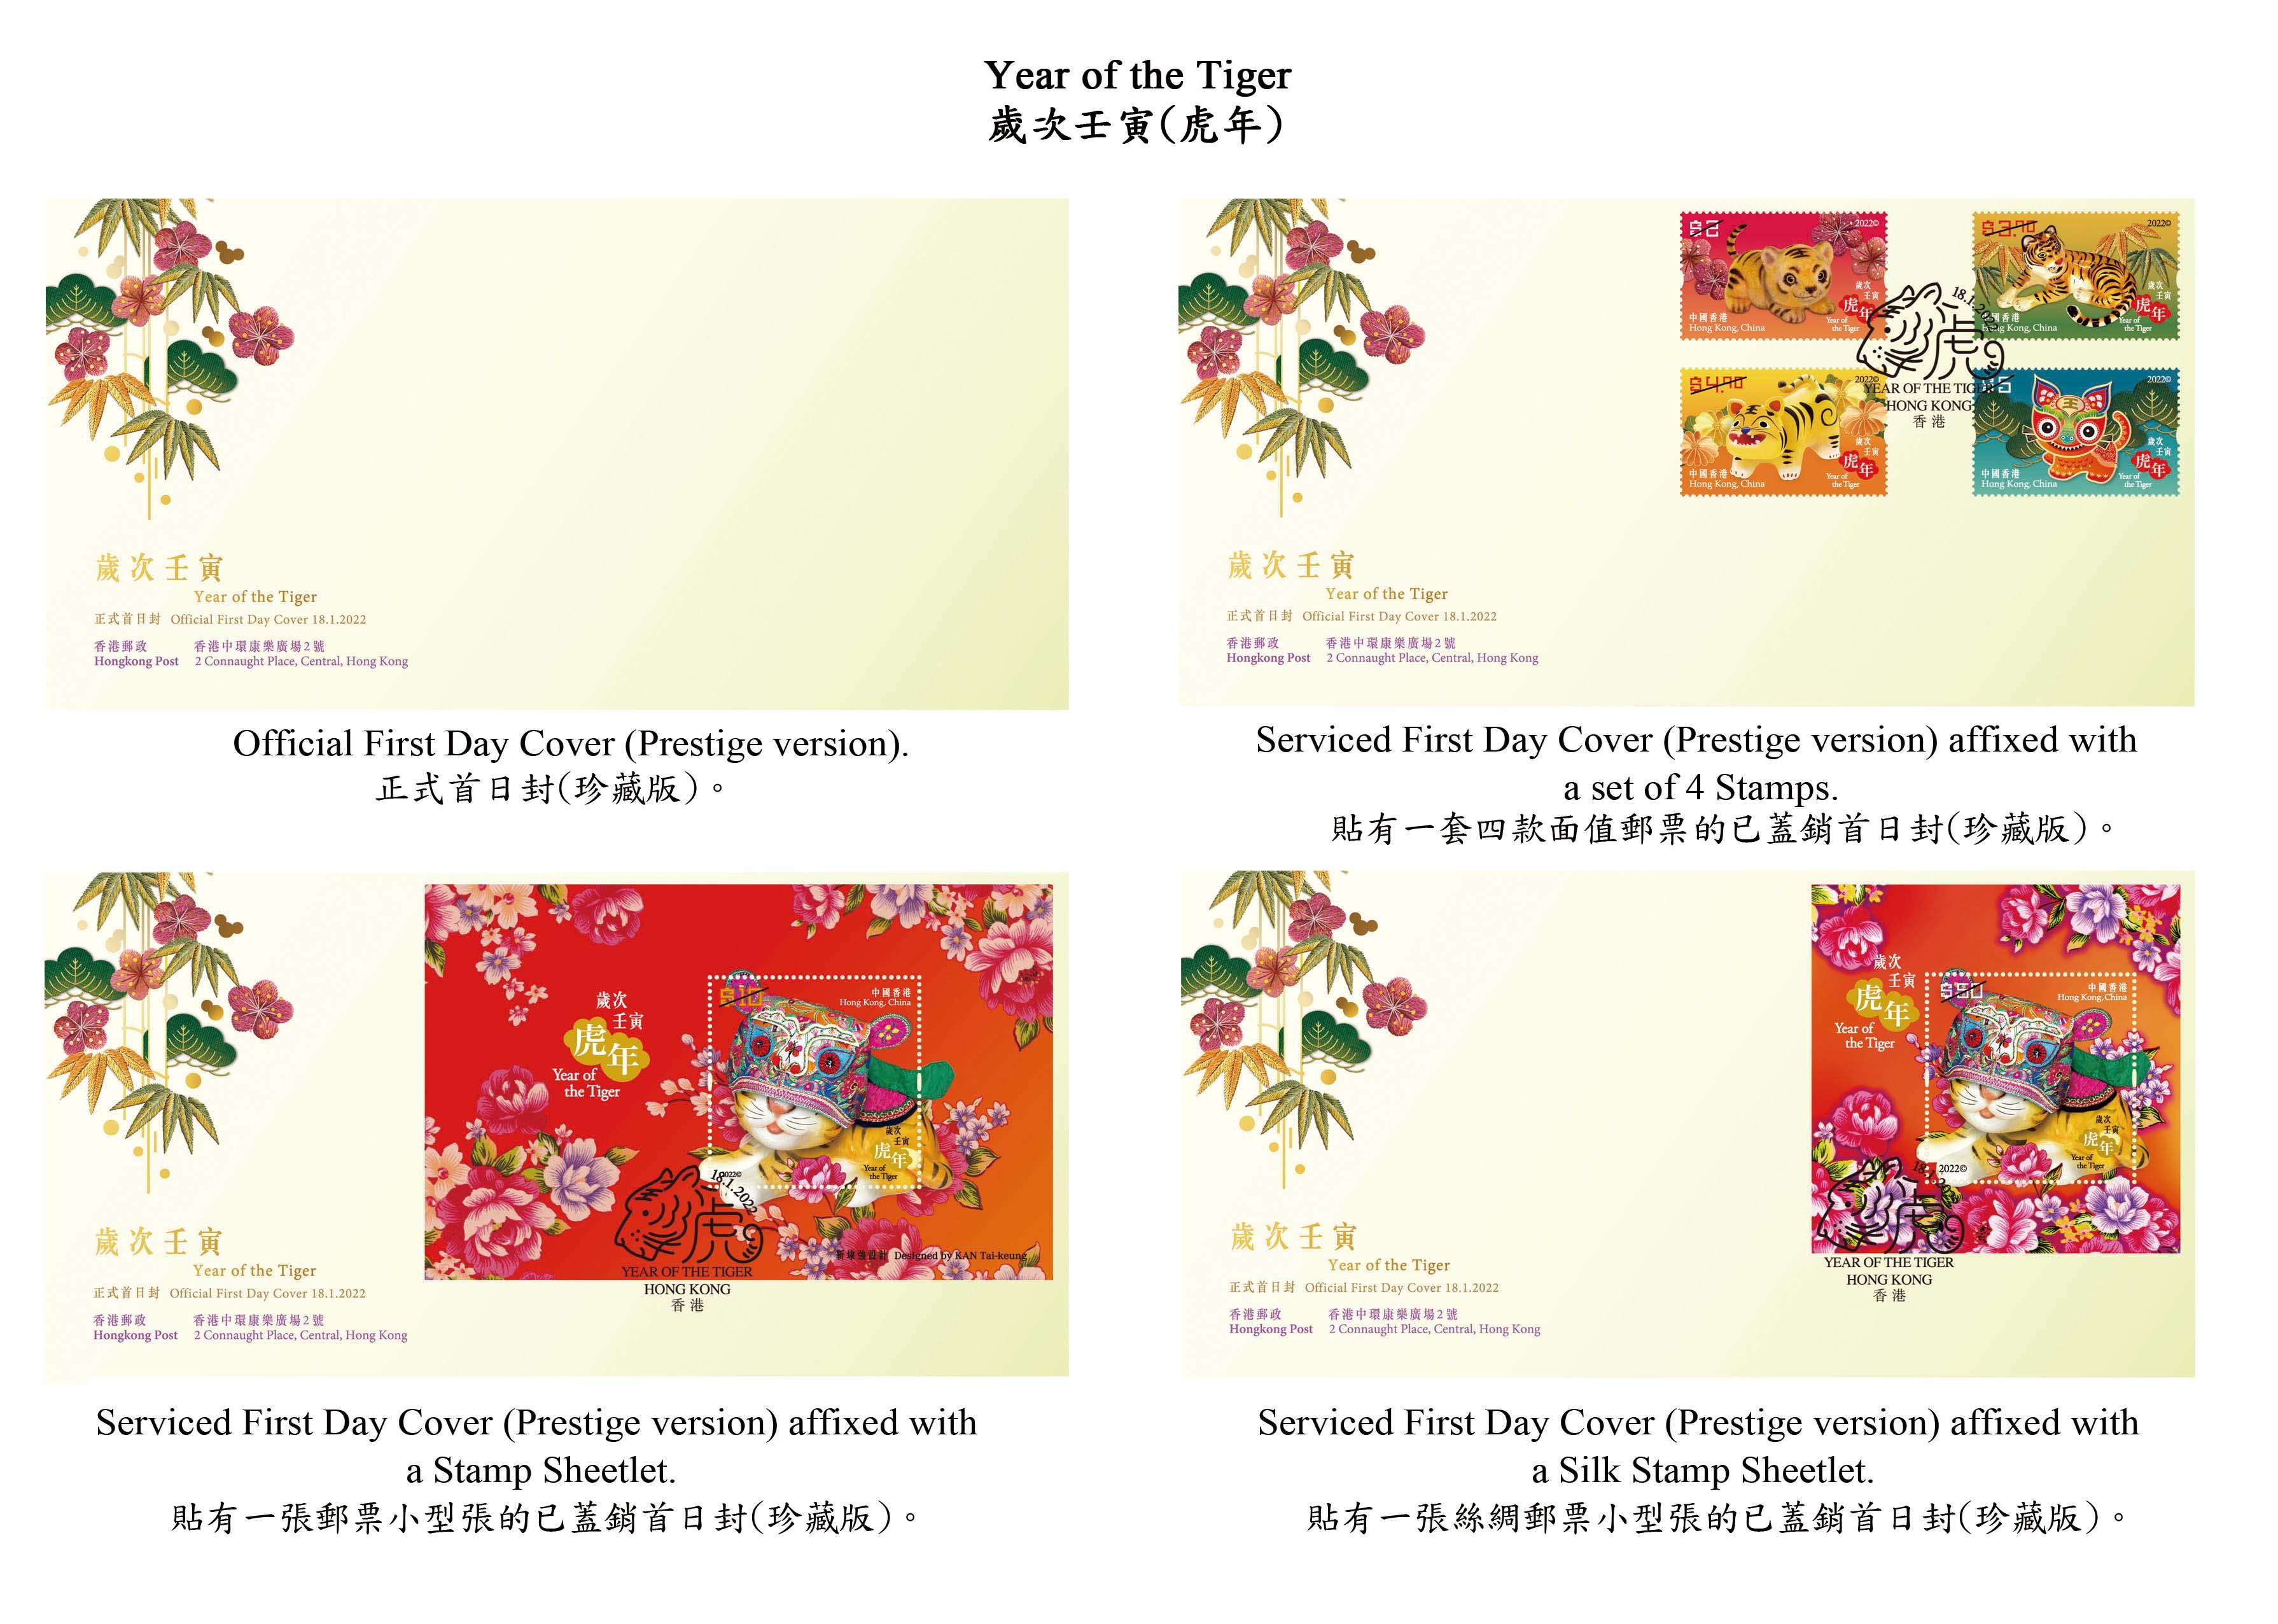 Hongkong Post will launch a special stamp issue and associated philatelic products with the theme "Year of the Tiger" on January 18 (Tuesday). Photo shows the prestige first day covers.
